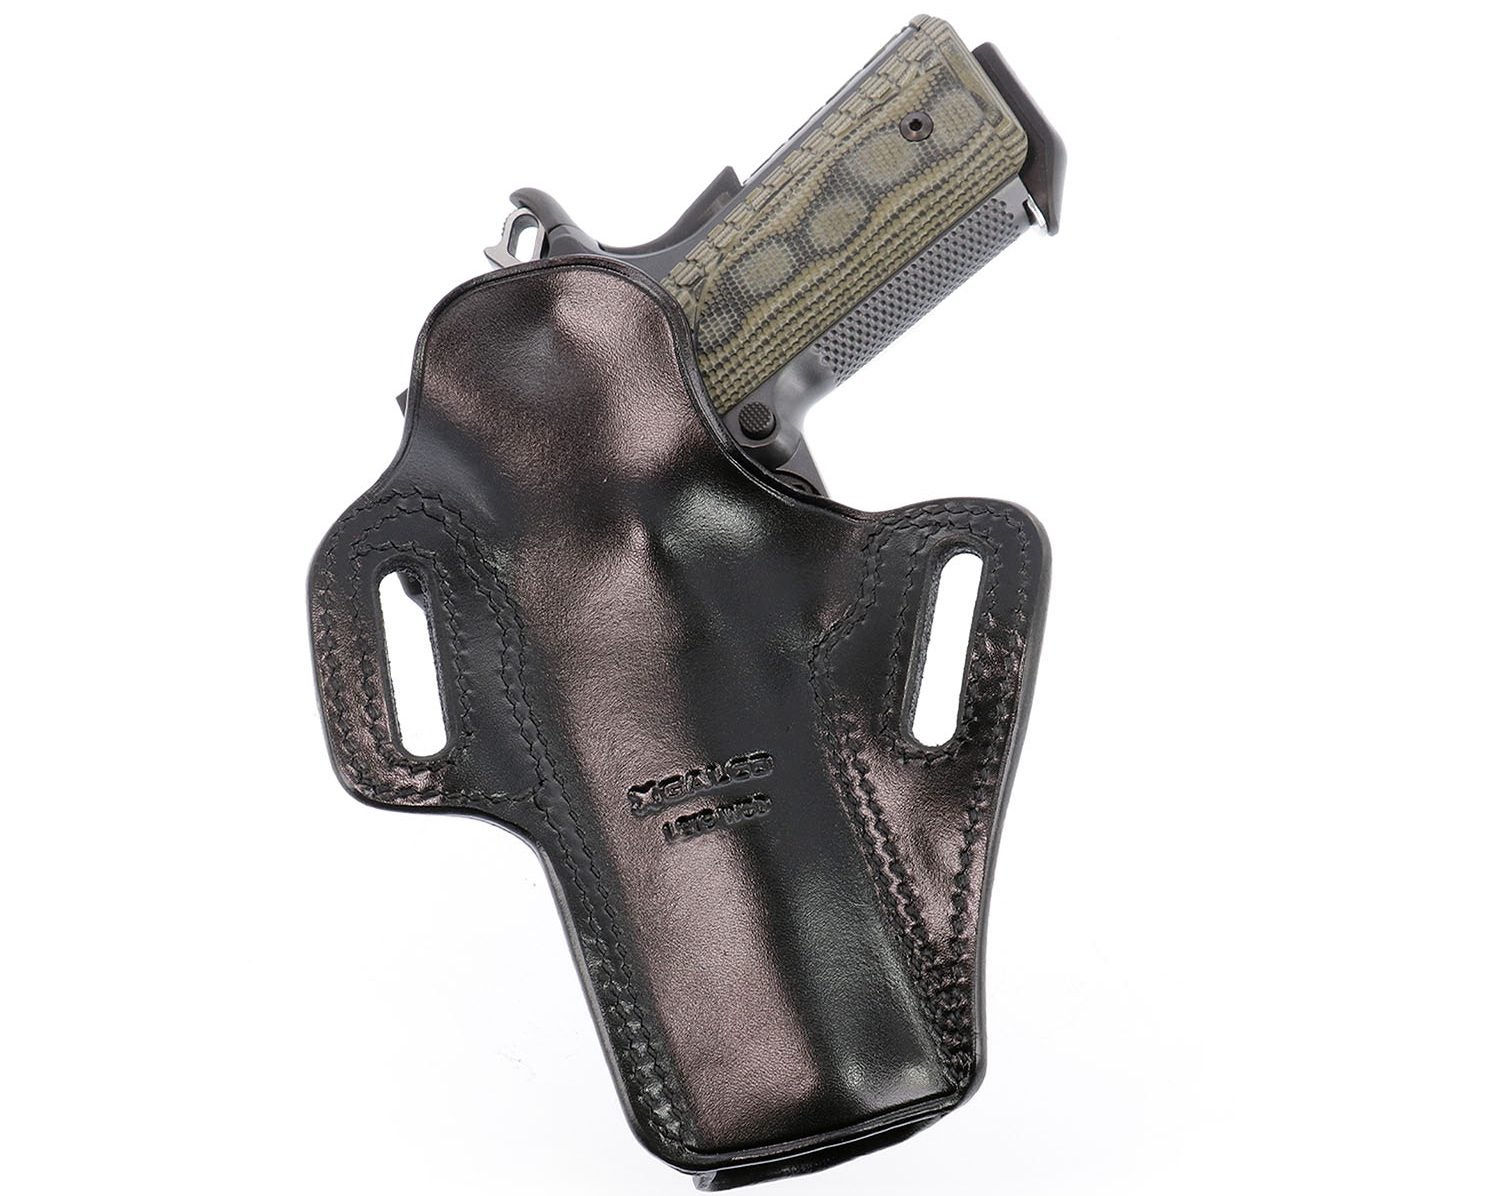 Galco Holsters Introduces the NEW Concealable 2.0 Holster